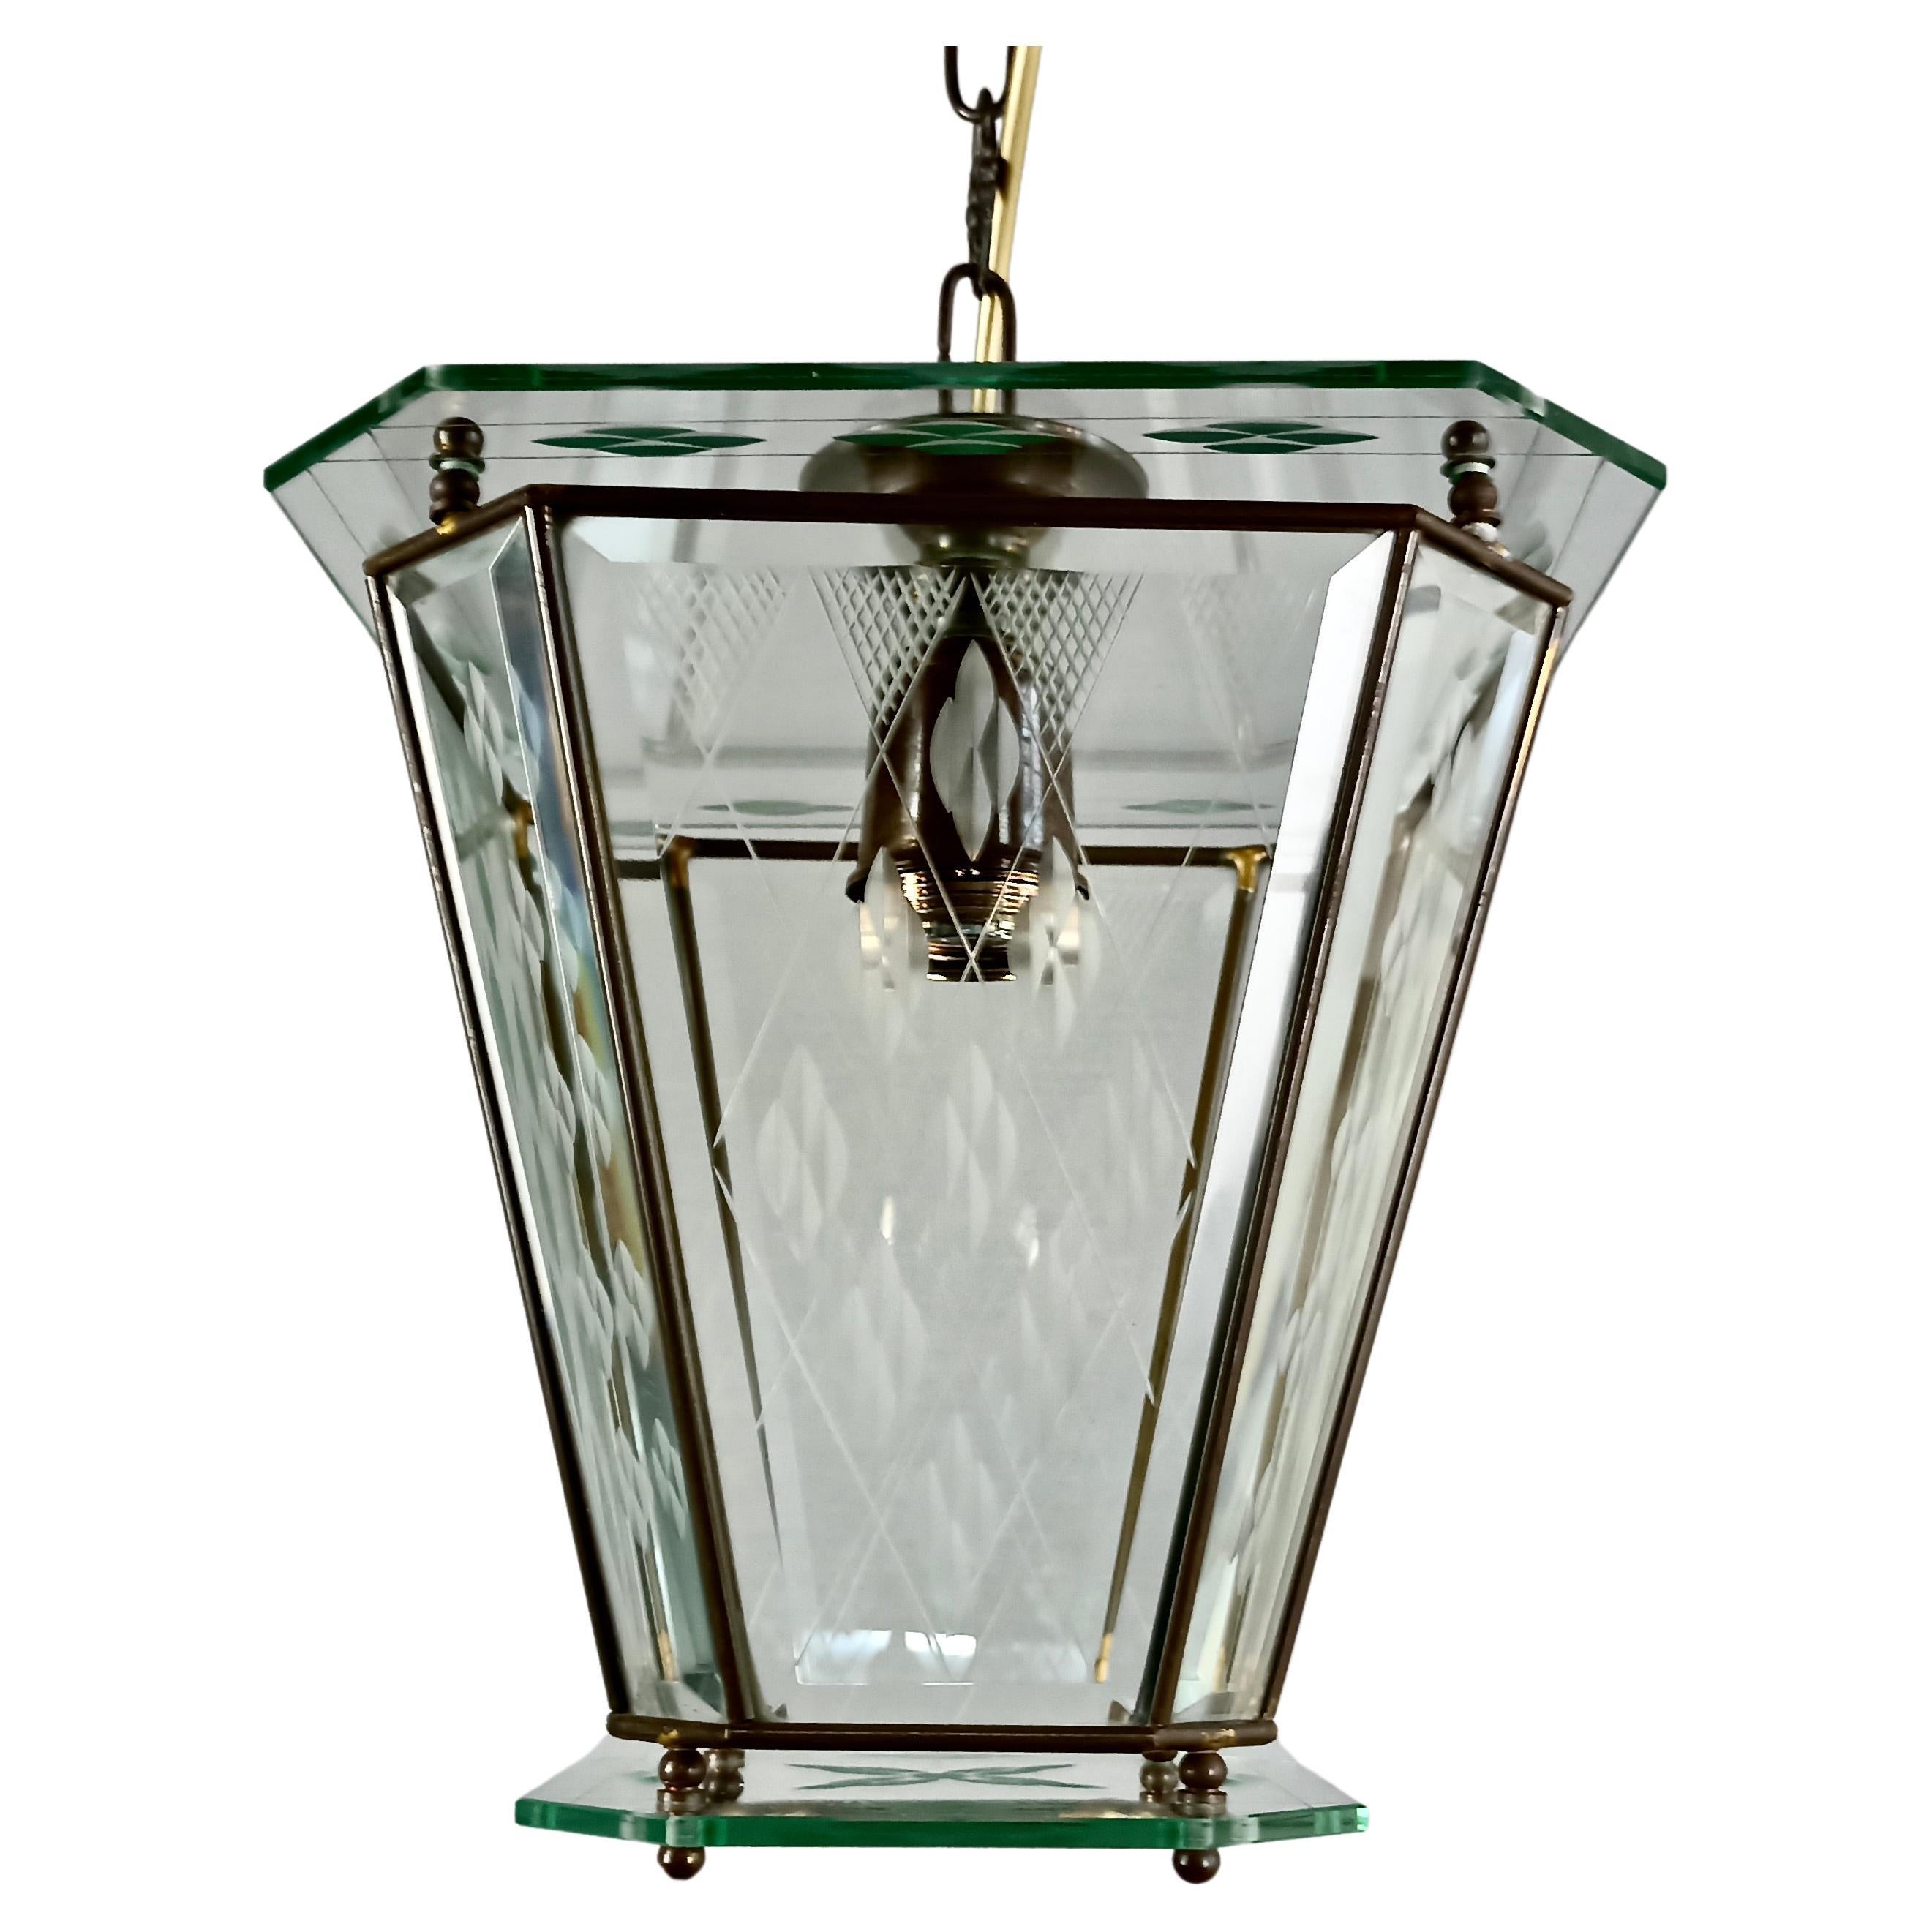 Beautiful Italian single-light 1950s lantern with shaped clear glass panes, grounded at the edges and engraved with nice decorative geometric patterns.
The lamp has a flared brass frame that holds mounted in the central part four trapezoidal-shaped